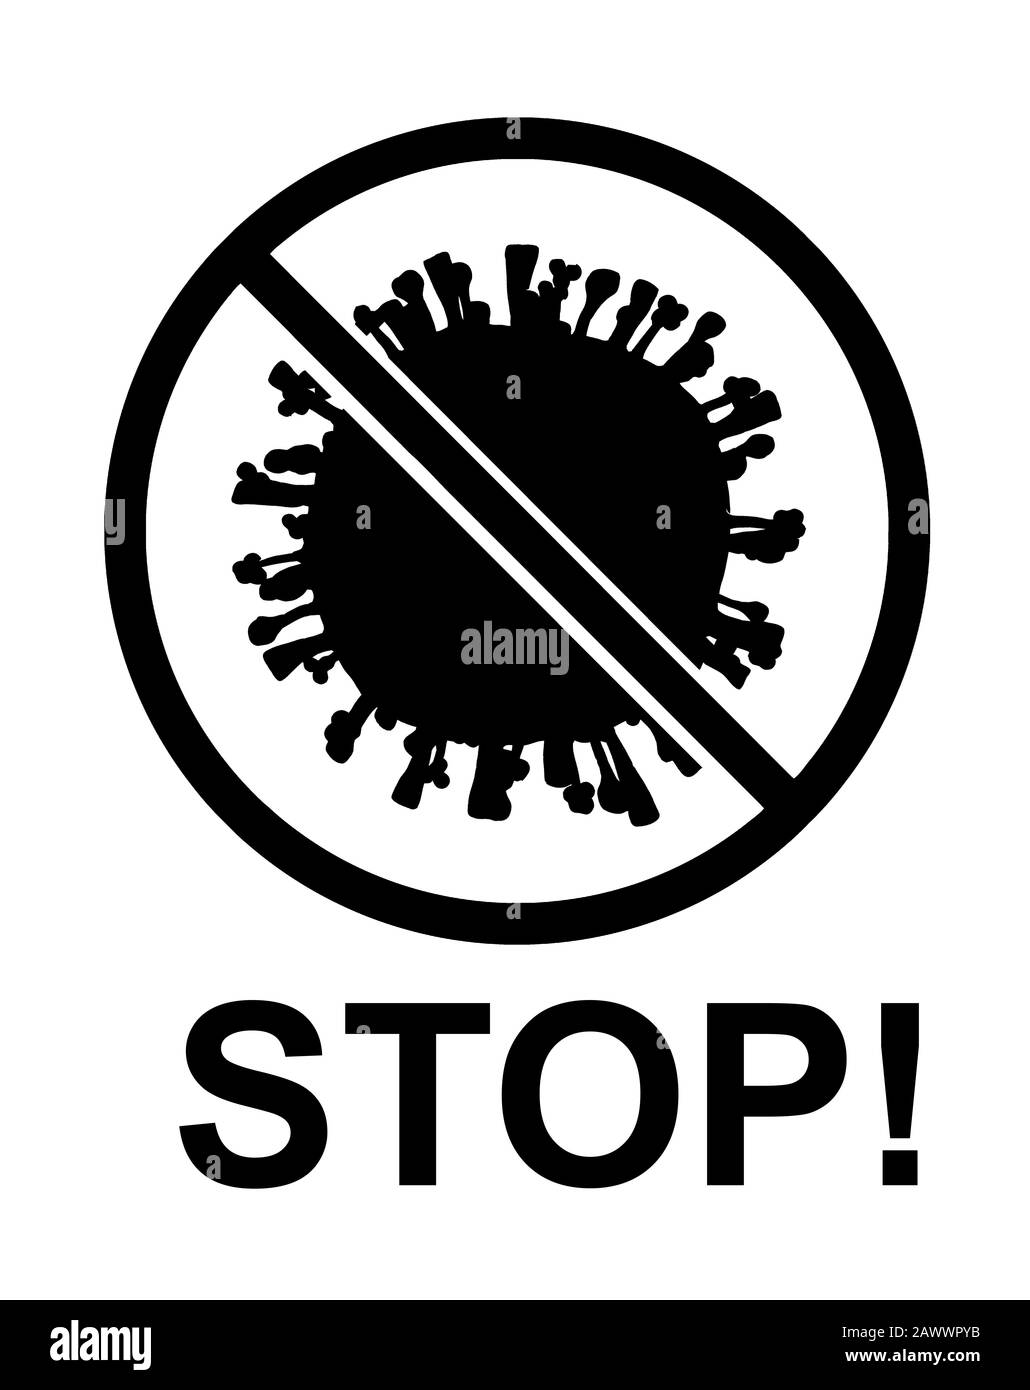 Stop the coronavirus 2019 nCov. Warning against the spread of the epidemic.  Isolated sign on a white background, illustration, black and white Stock  Photo - Alamy